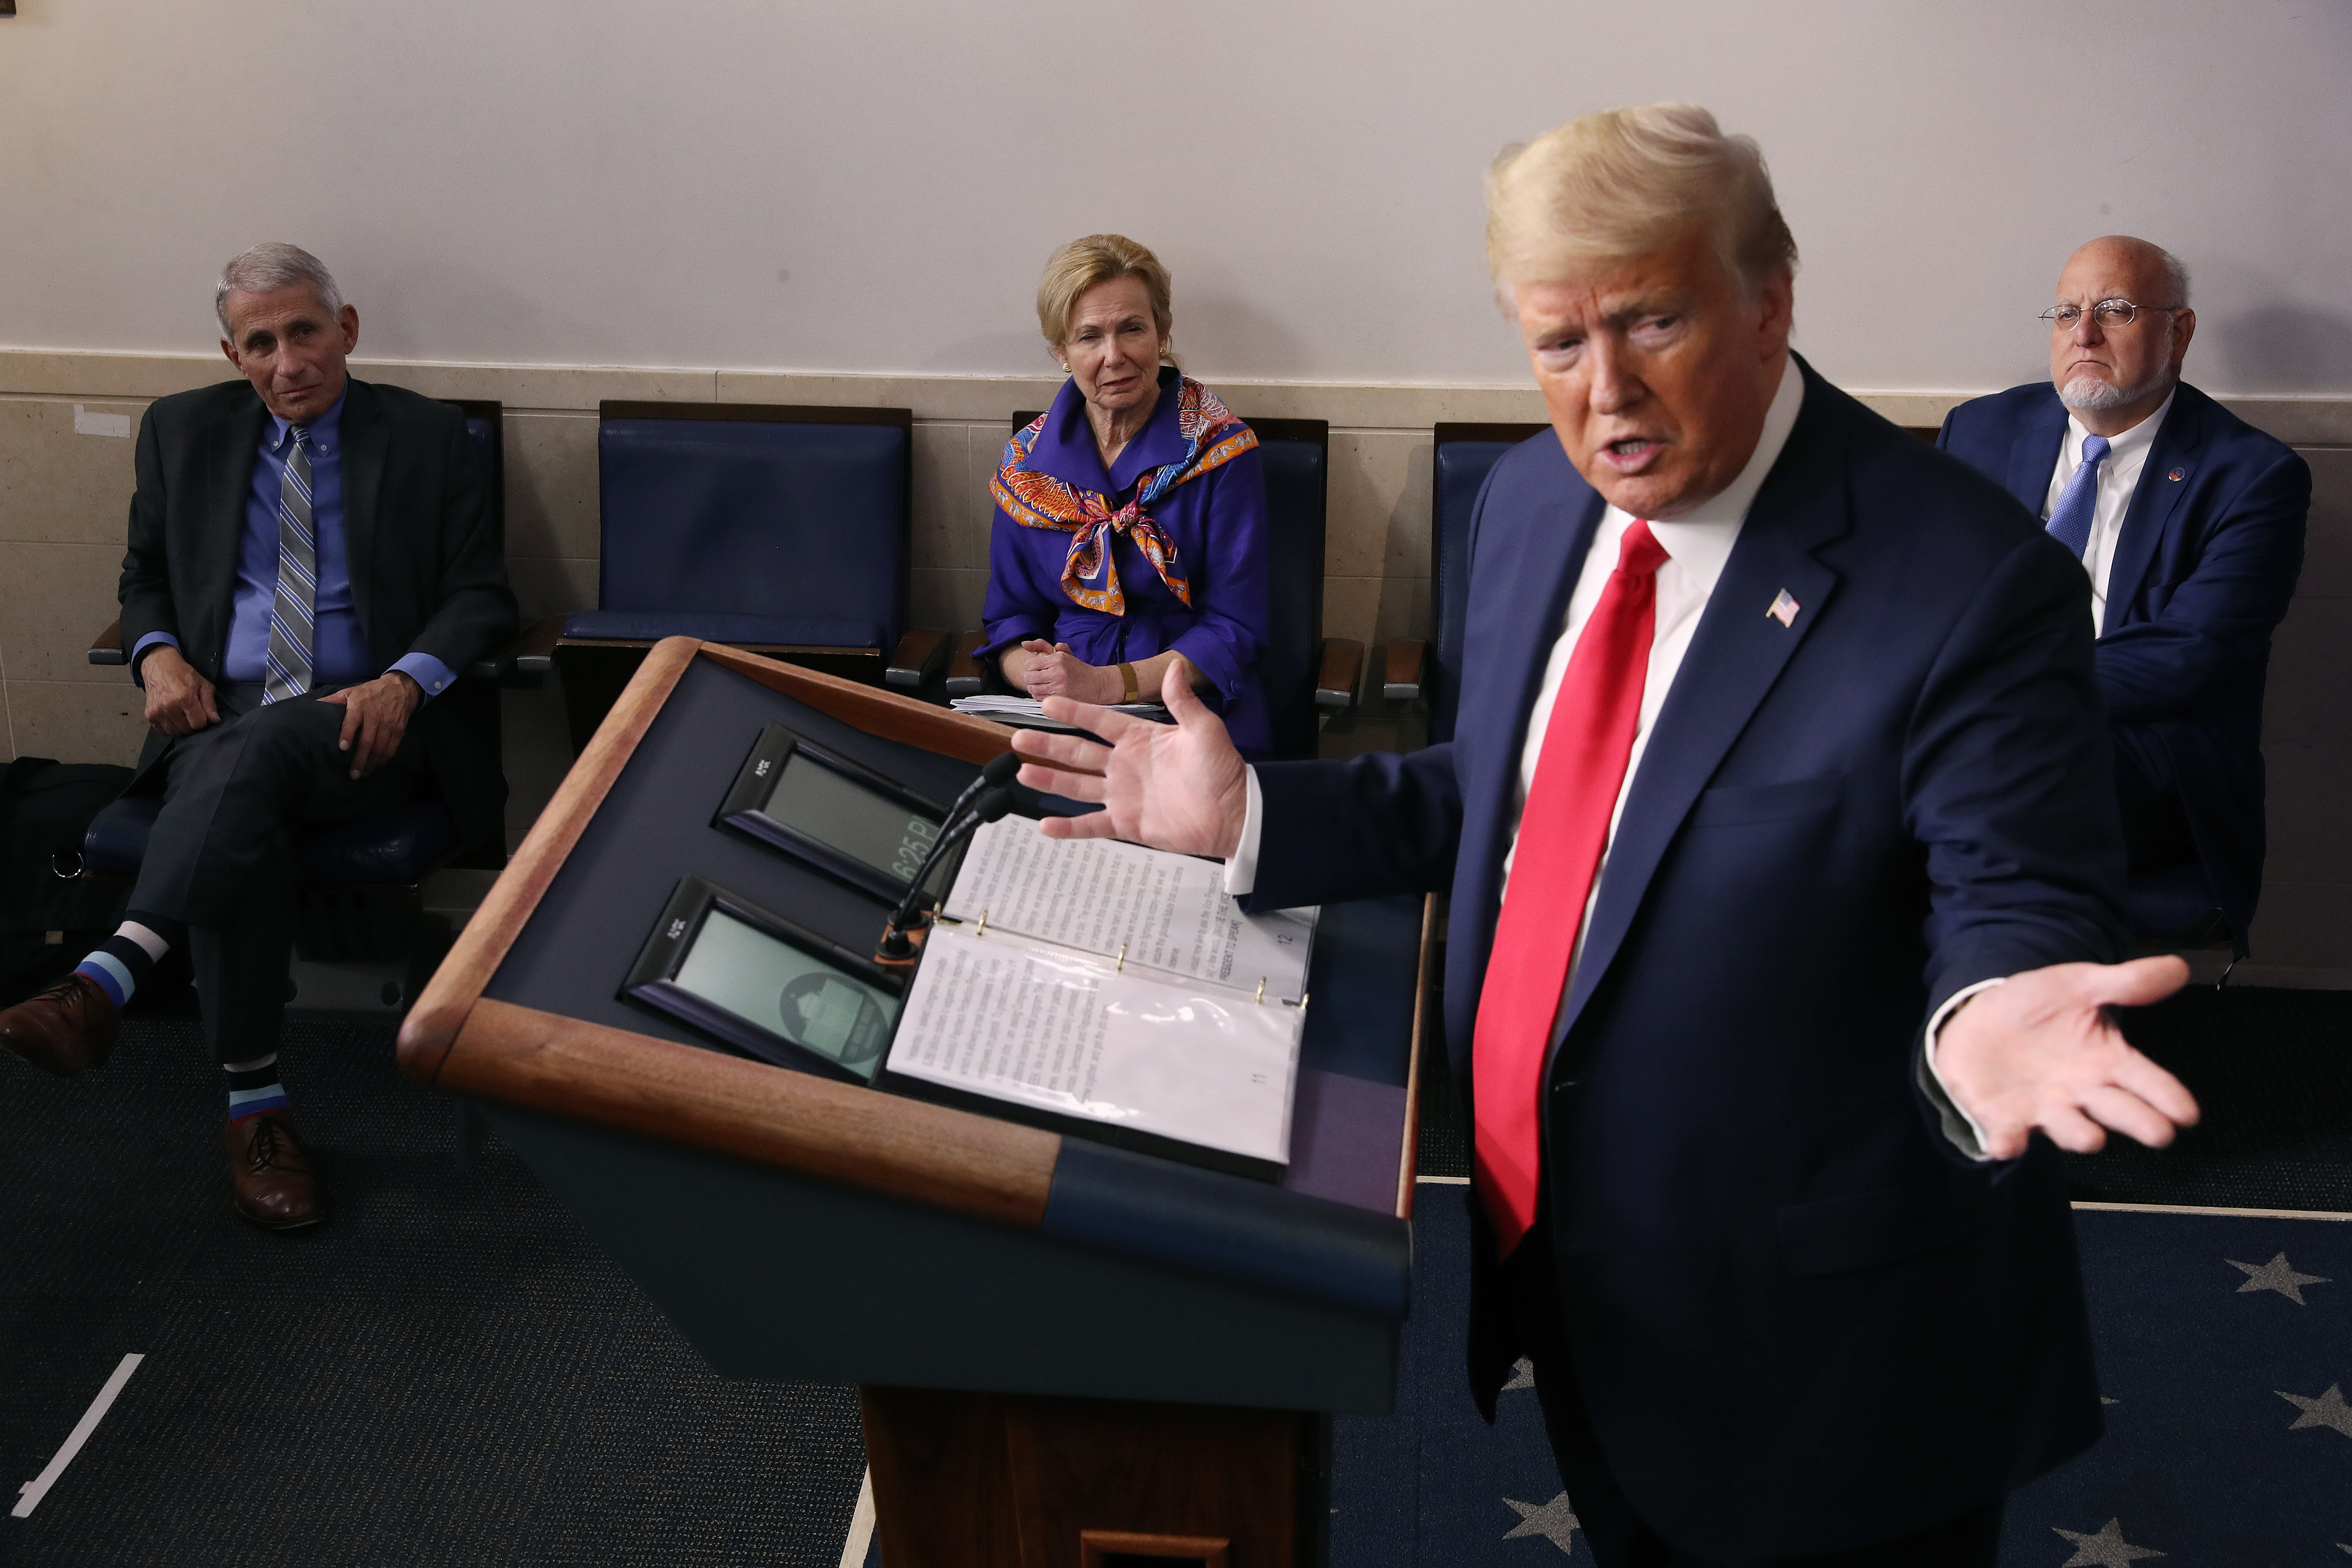 President Donald Trump speaks during a coronavirus task force briefing at the White House on April 8. In the background are, from left, Dr. Anthony Fauci, director of the National Institute of Allergy and Infectious Diseases; Dr. Deborah Birx, White House coronavirus response coordinator; and Dr. Robert Redfield, director of the Centers for Disease Control and Prevention.